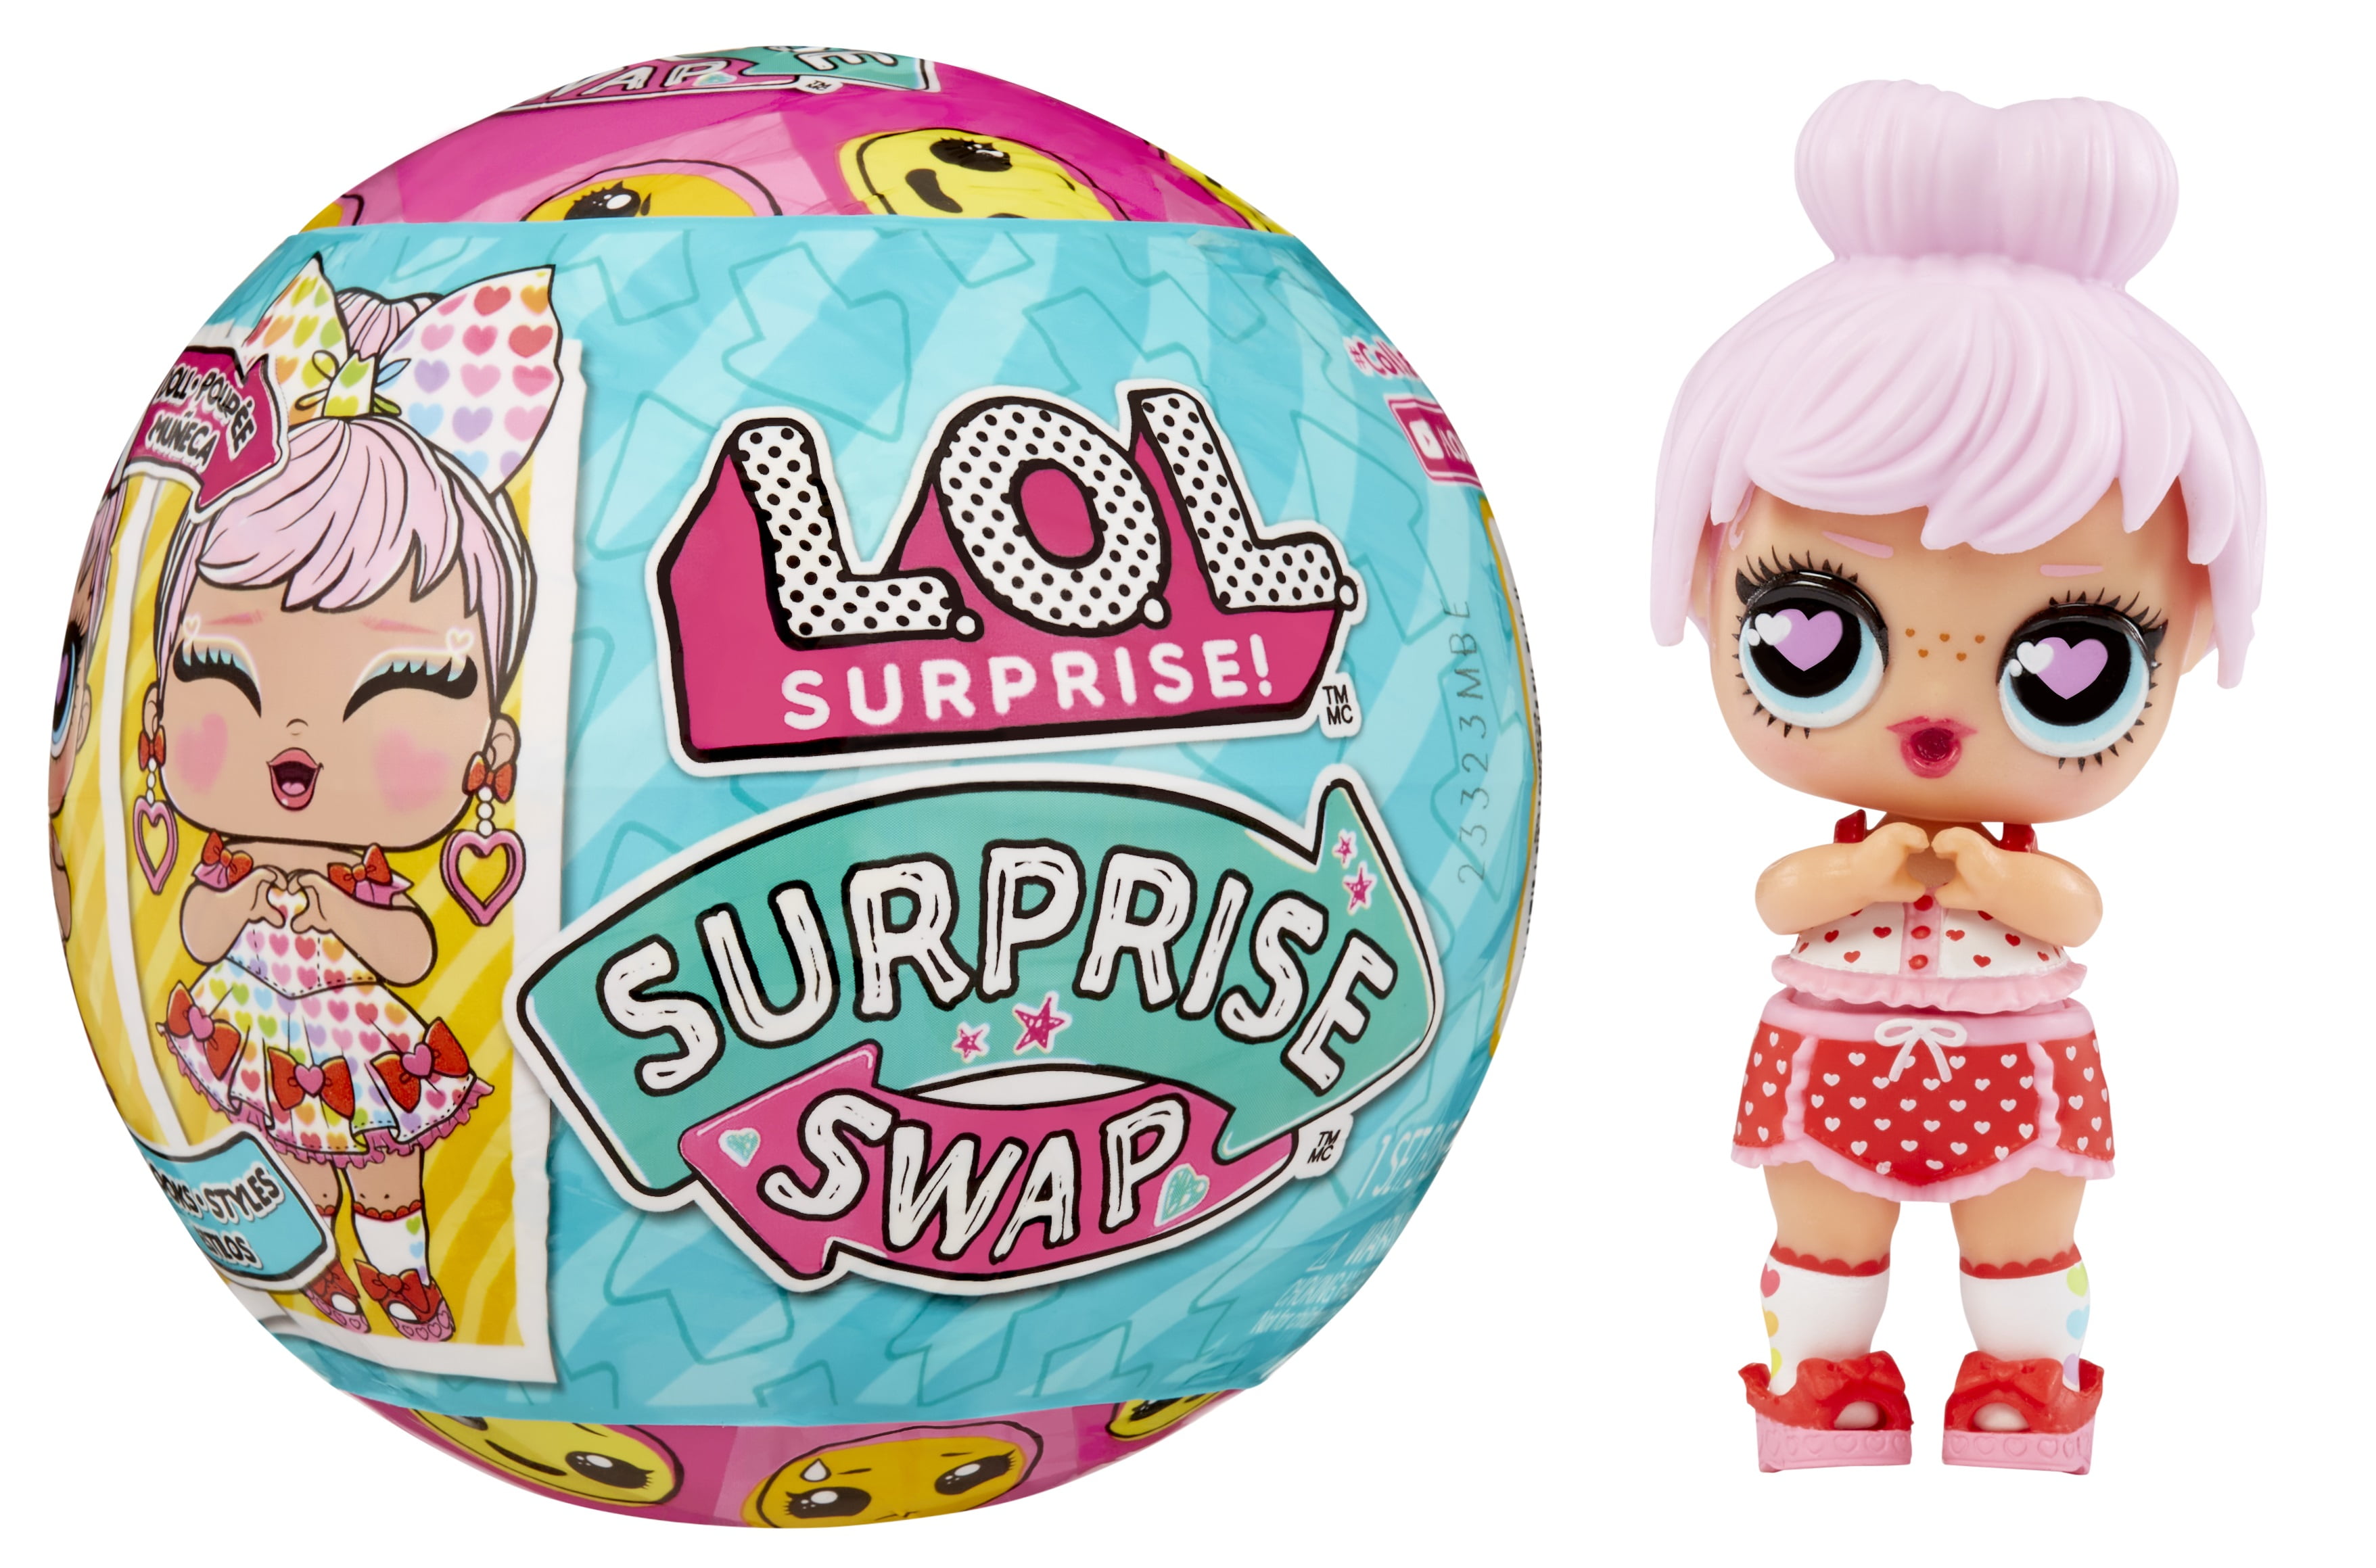 LOL Surprise! Surprise Swap Tots- with Collectible Doll, Extra Expression, 2 Looks in One, Water Unboxing Surprise, Limited Edition Doll, Great Gift for Girls Age 3+ $9.97